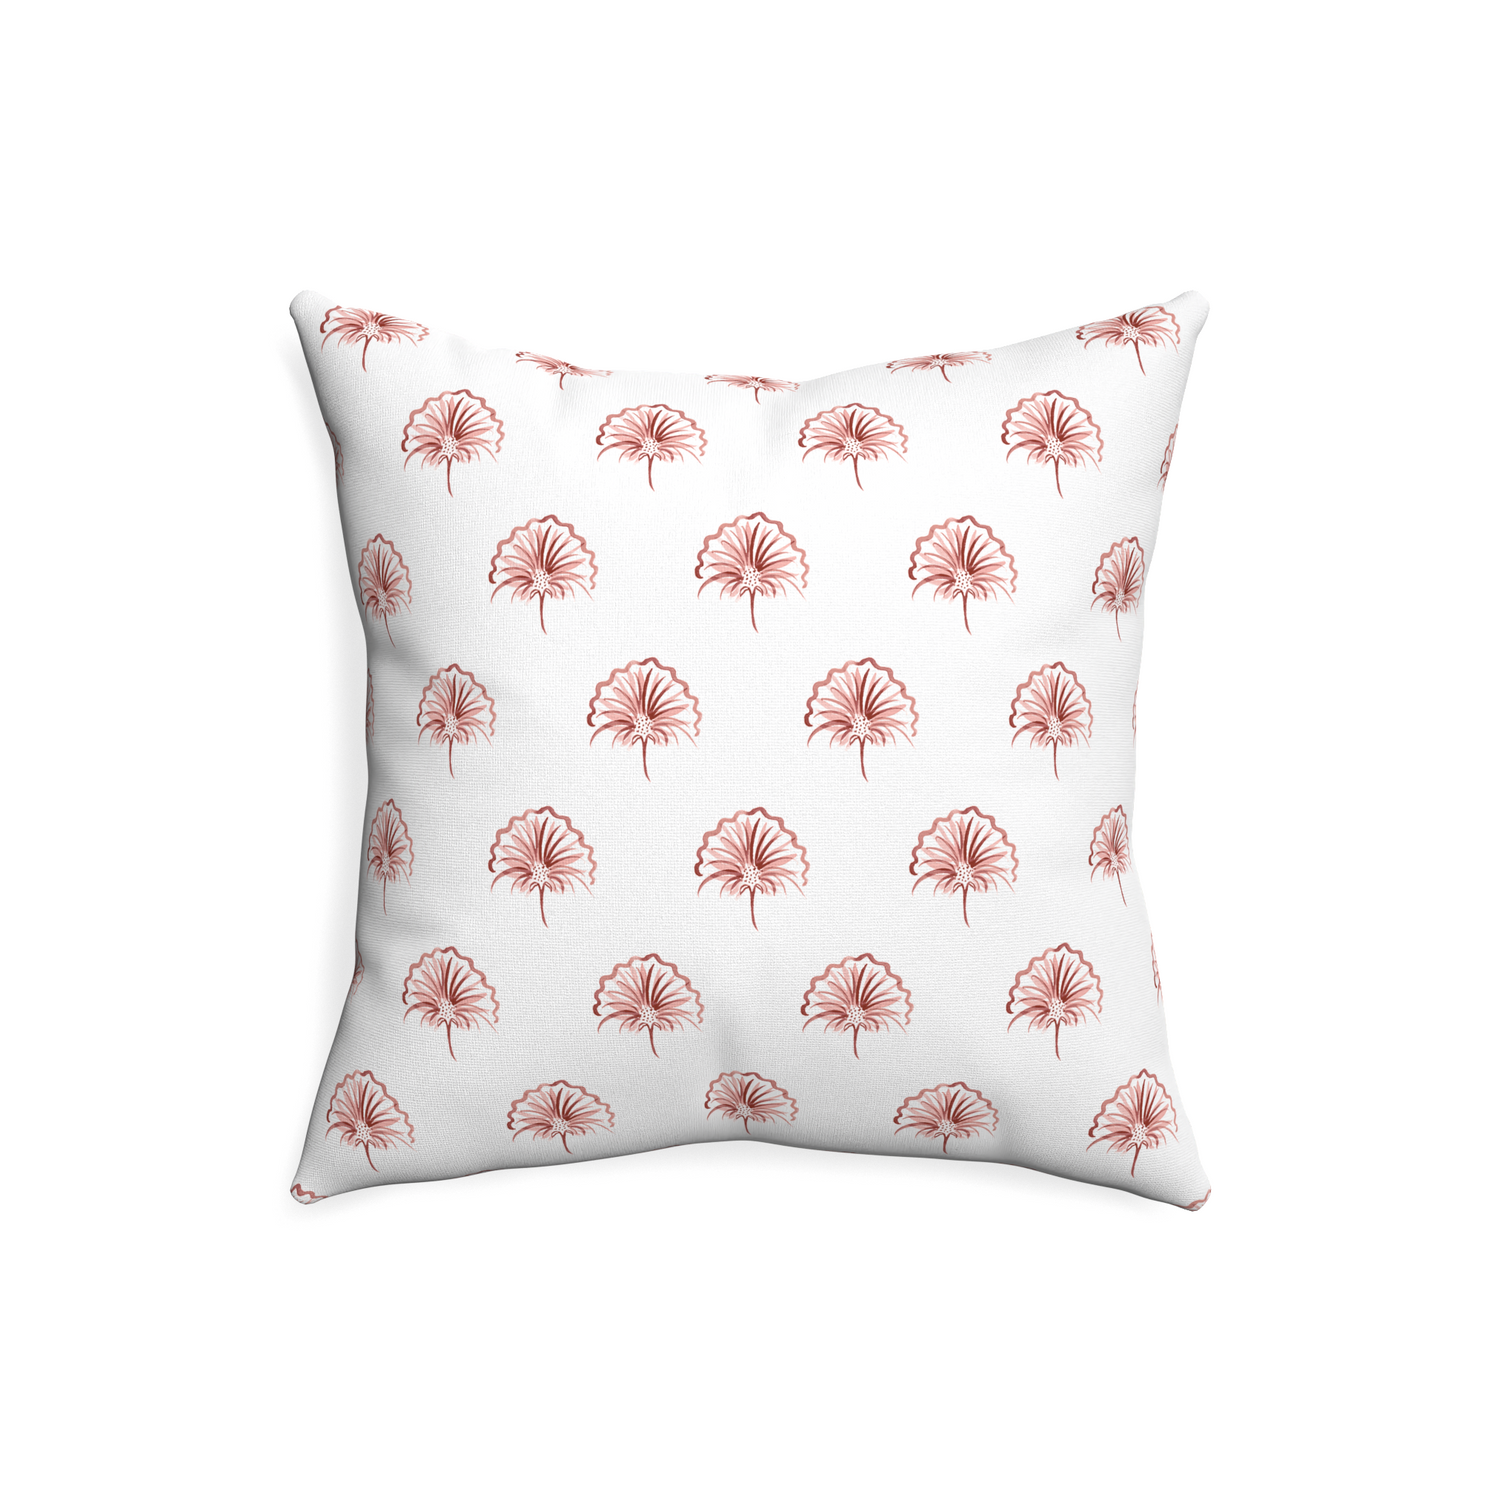 20-square penelope rose custom pillow with none on white background